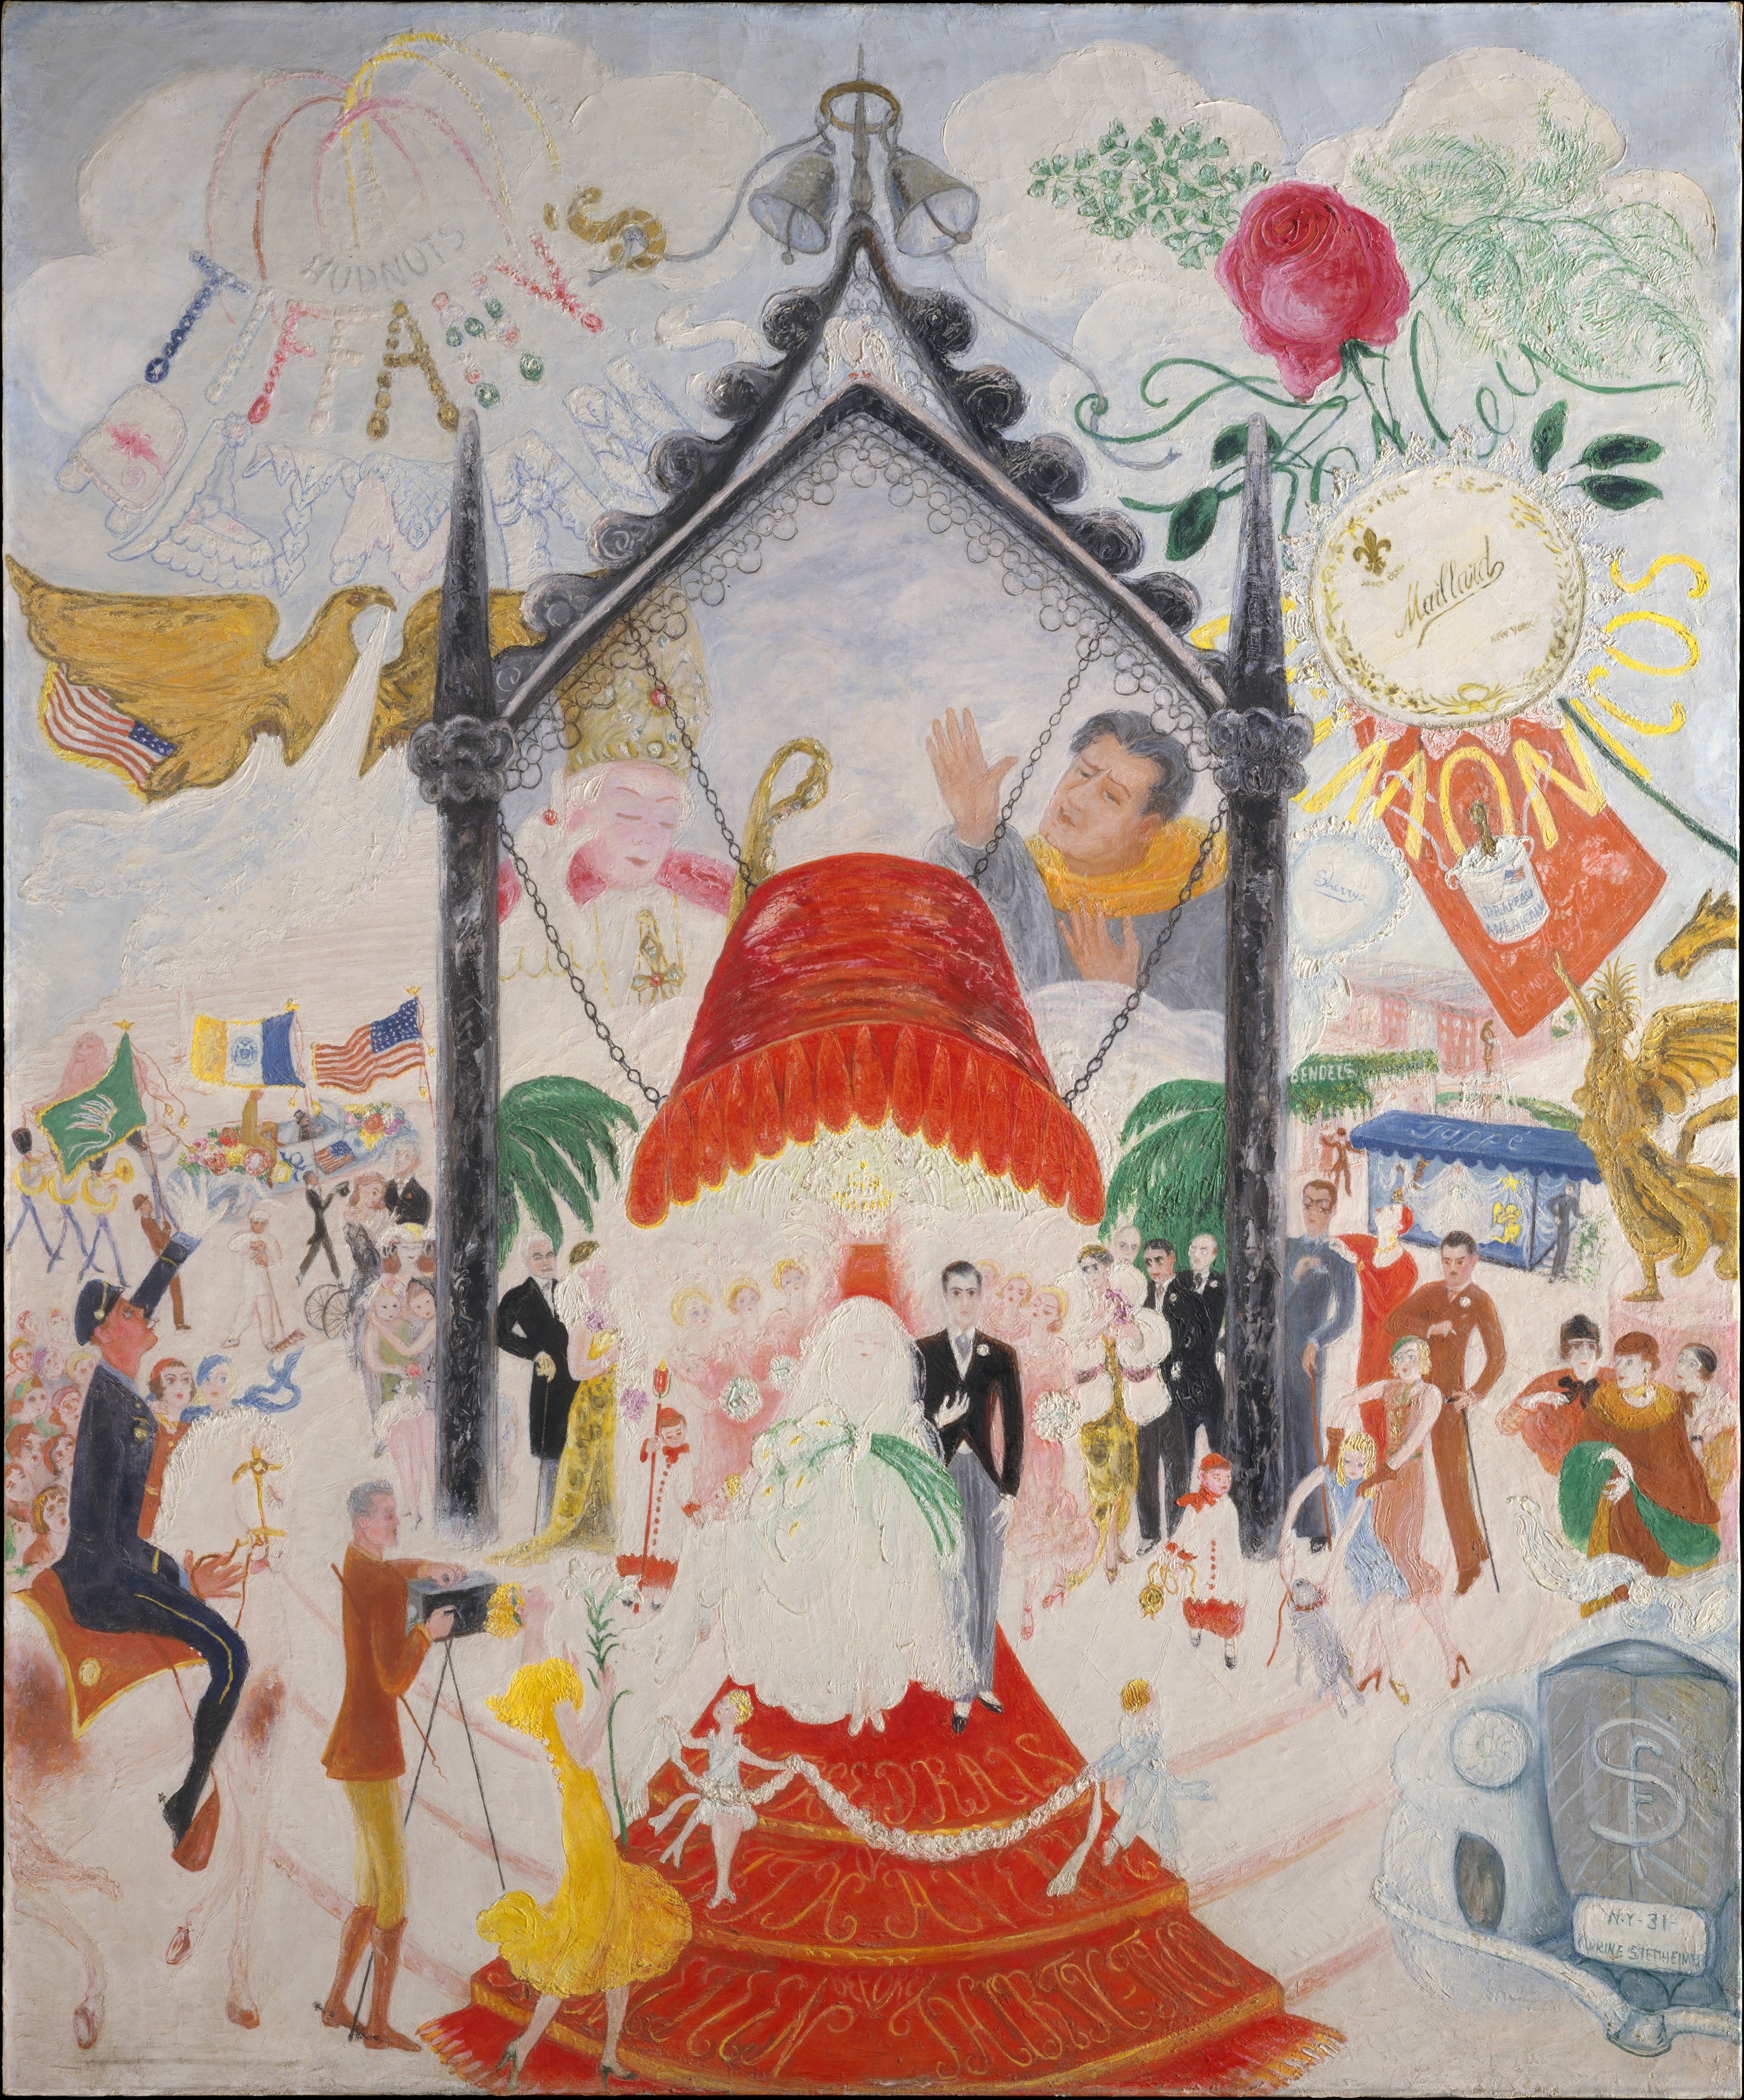 The Cathedrals of Fifth Avenue by Florine Stettheimer - 1931 - 152.4 x 127 cm Metropolitan Museum of Art